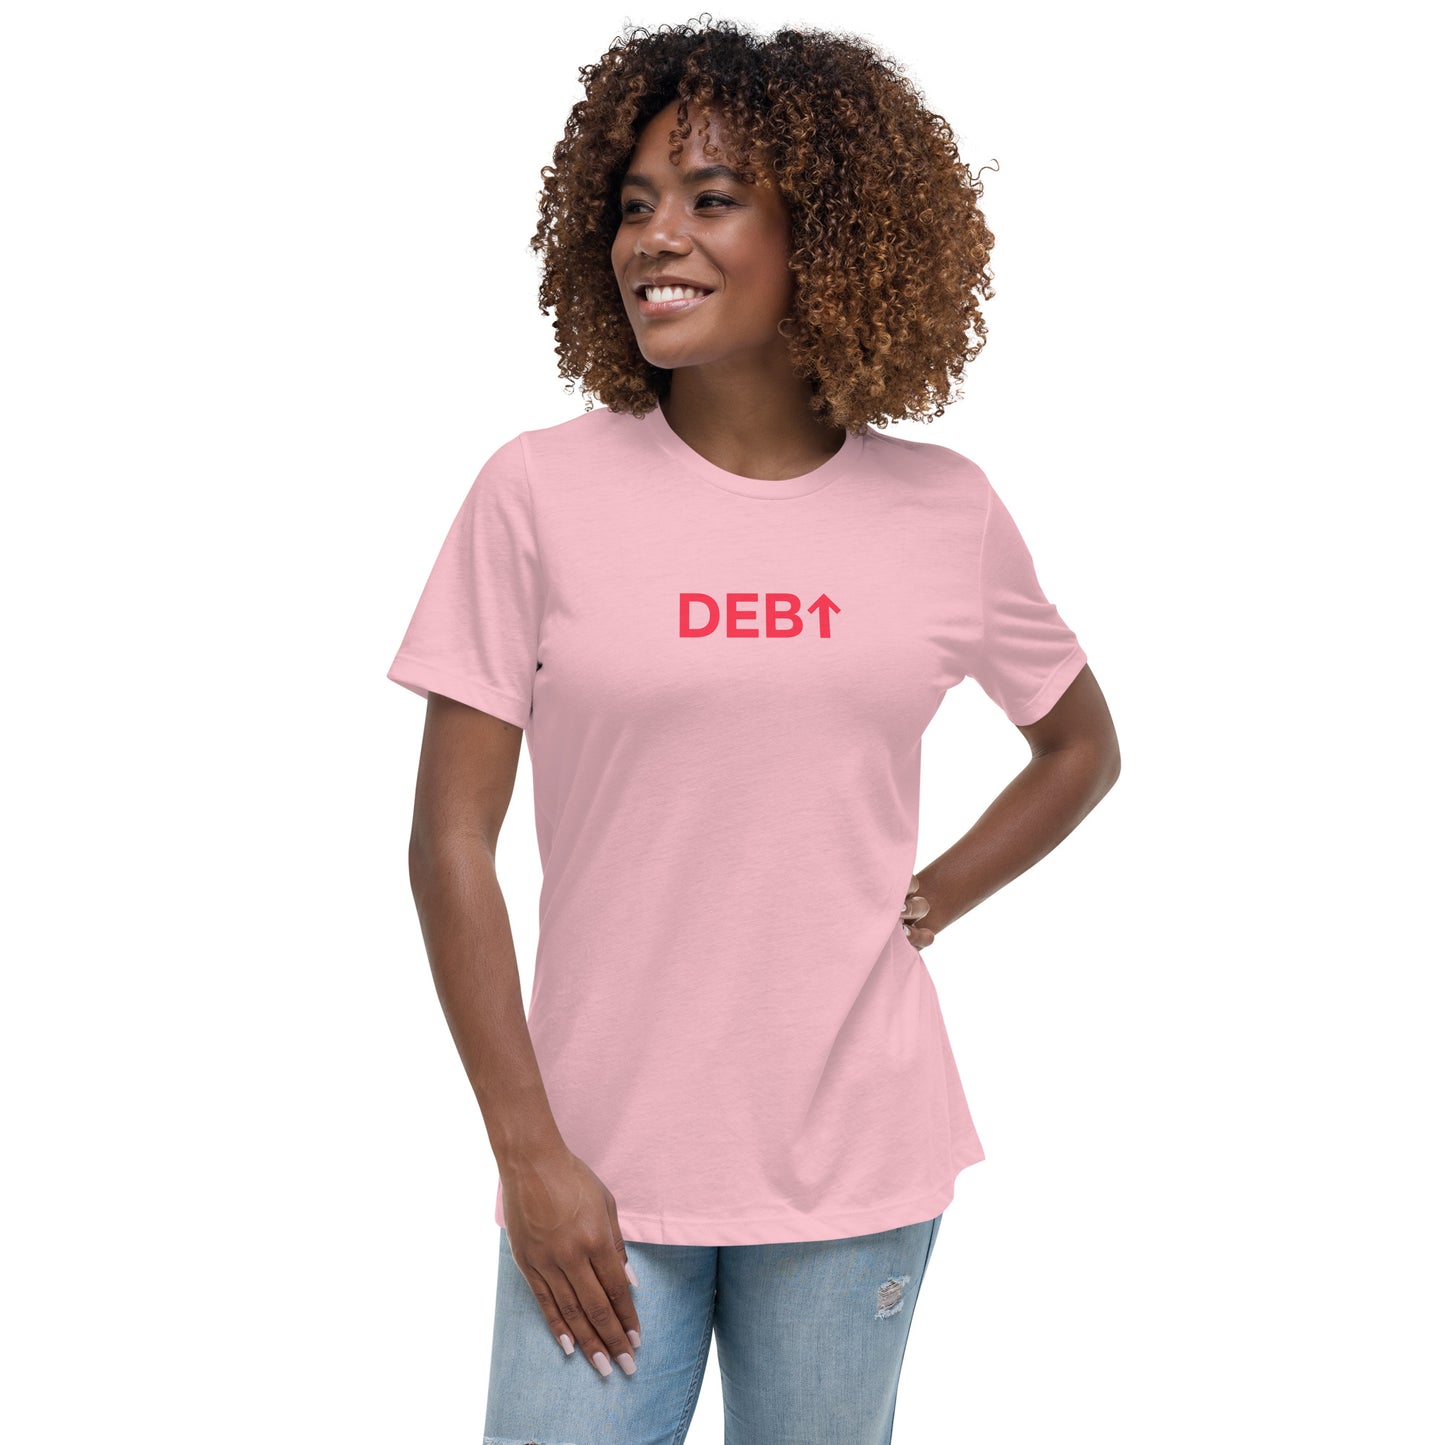 Women's Relaxed T-Shirt - Red Print